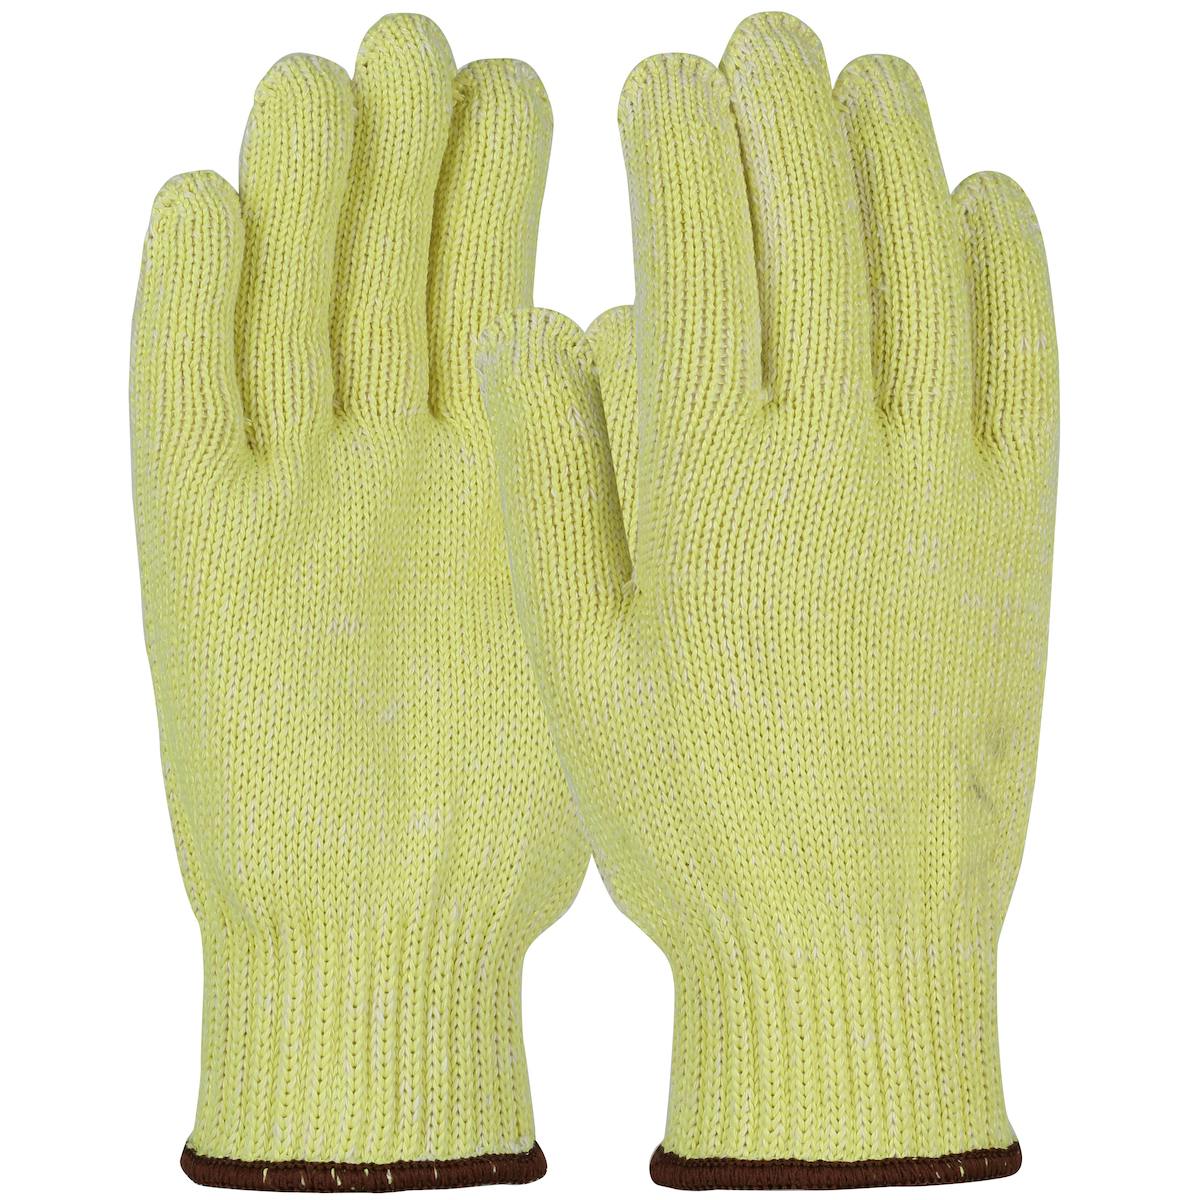 Kut Gard® Seamless Knit ATA® Blended with Cotton Plating Glove - Heavy Weight (MATA30PL)